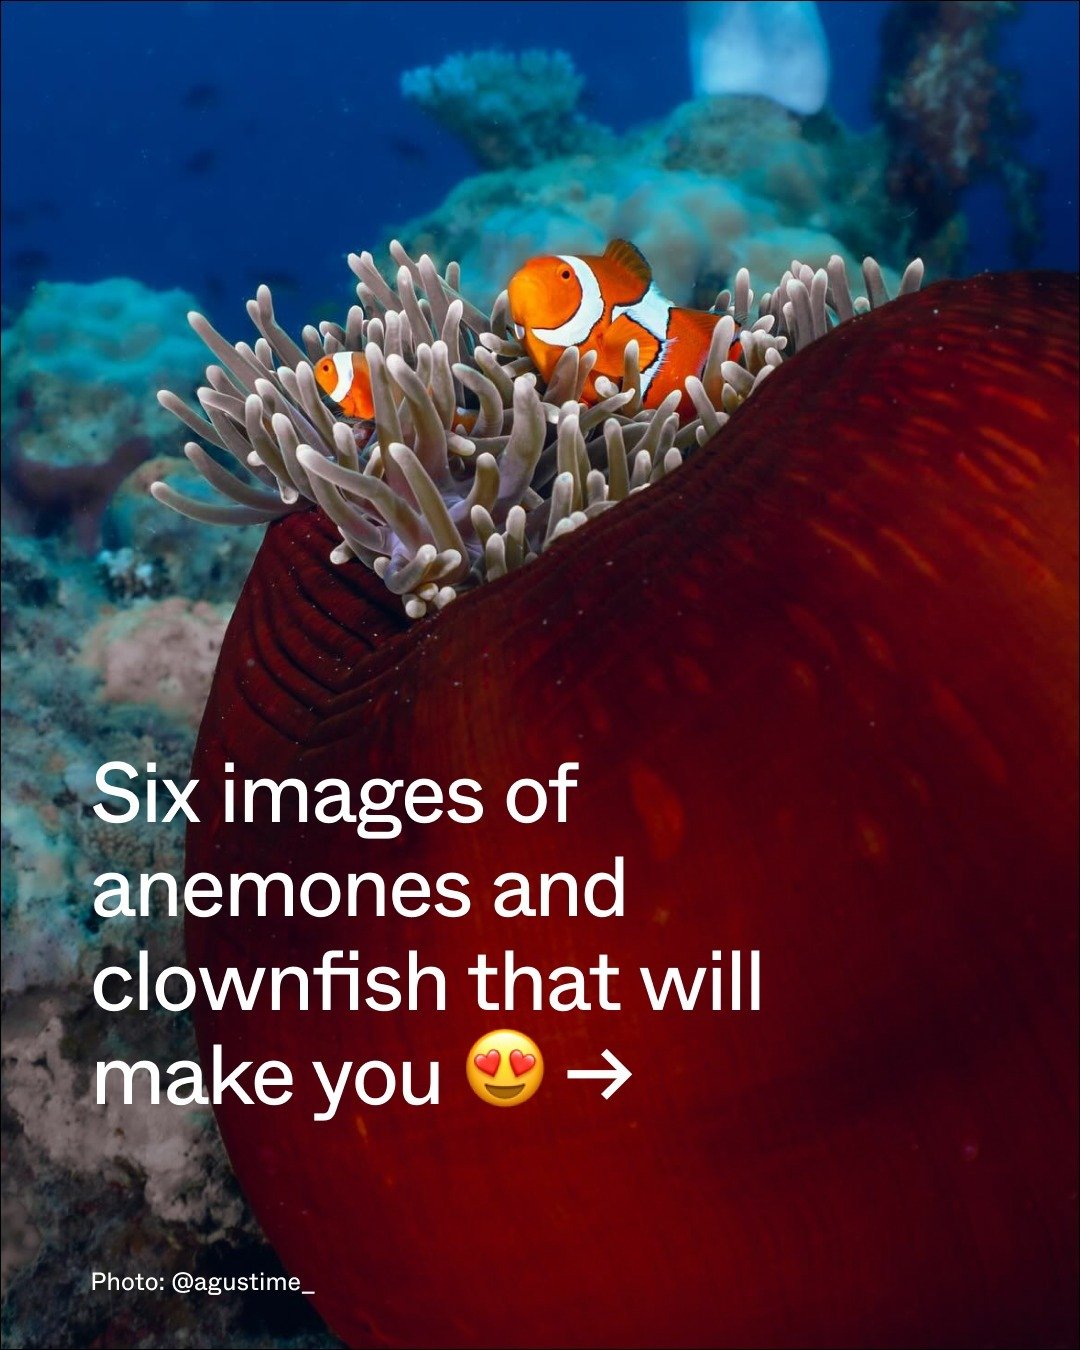 Clownfish are known for their remarkable symbiotic relationship with sea anemones, living among the stinging tentacles that protect them from predators as they provide nutrients for the flower-like invertebrate. They possess a unique immunity to the 